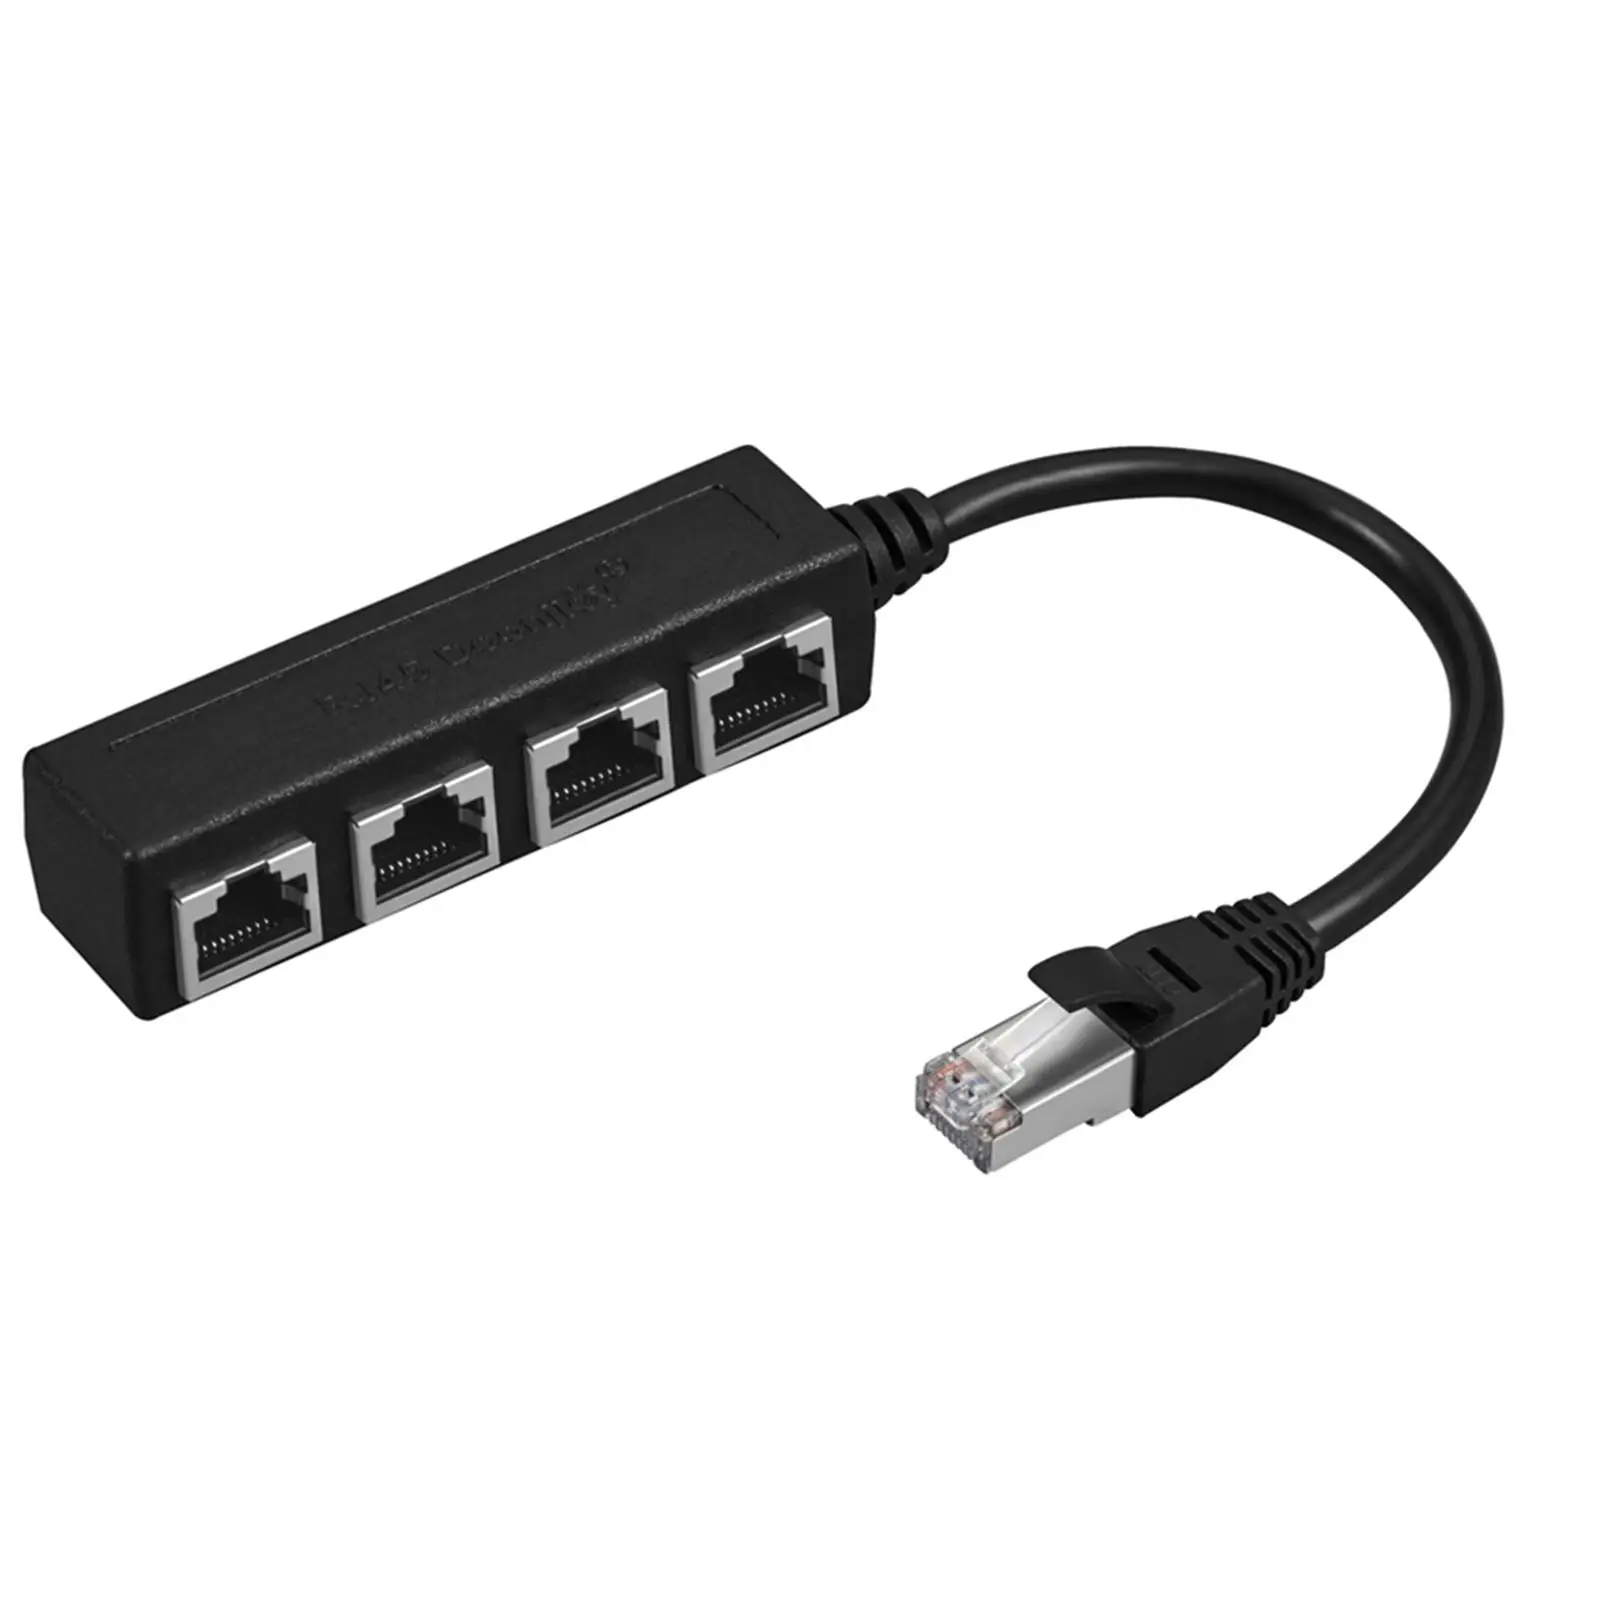 Ethernet Splitter, 1 Male to 4x Female Plug and 1 to 4 Port LAN Network Extension Cable Connector, for Laptop PC Computer.